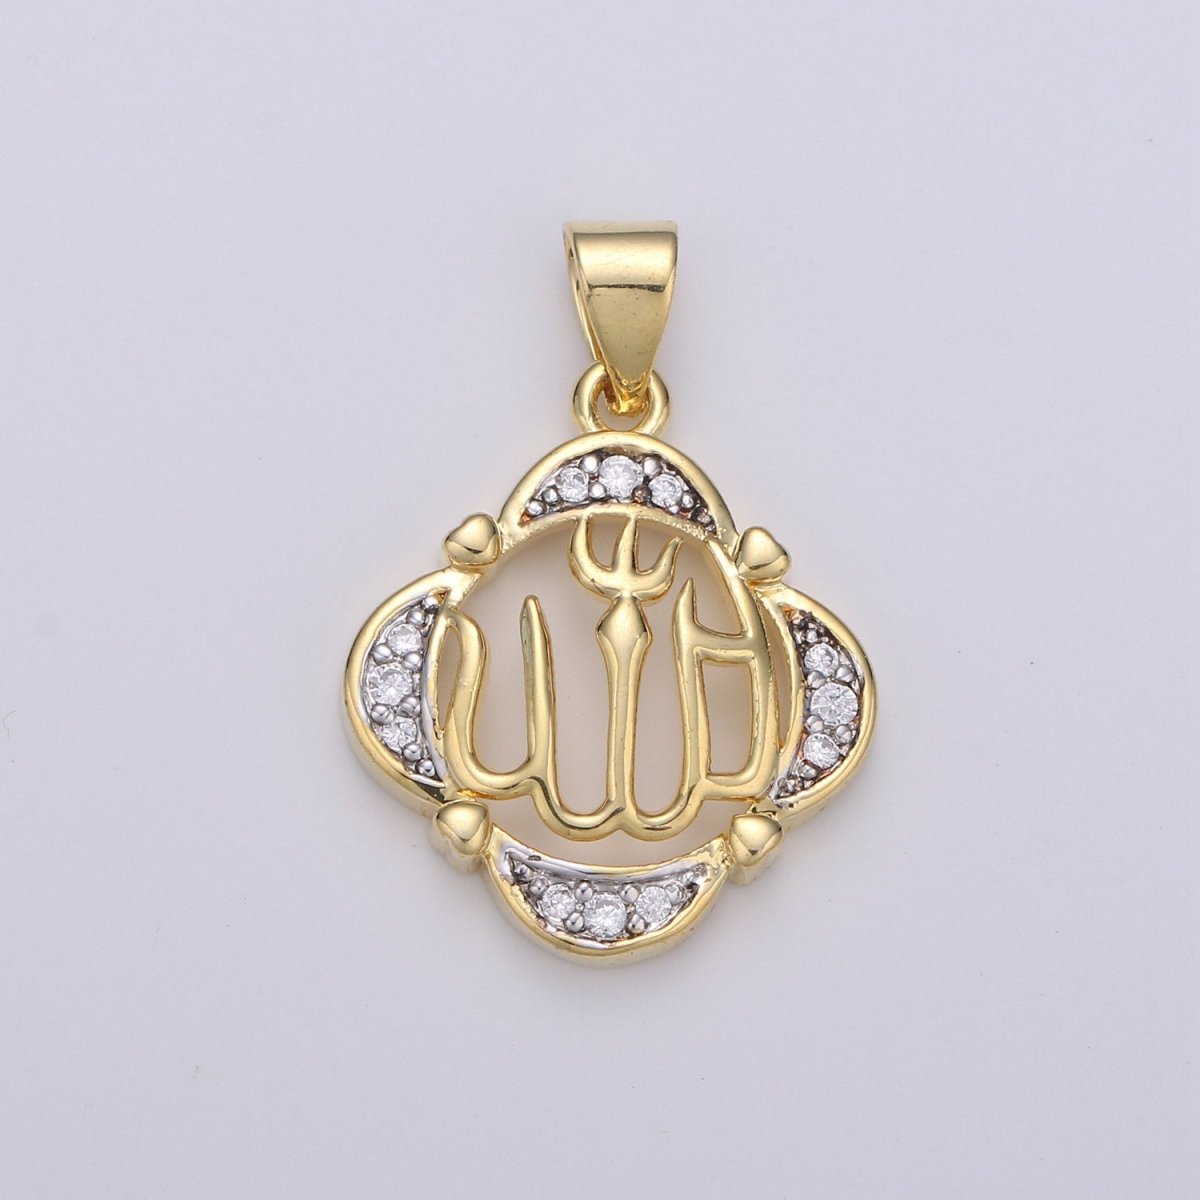 2 Tone Color Pendant in 24k Gold Filled Jewelry Allah Pendant Micro Pave Calligraphy Pendant Necklace for Muslim Islam Religious Jewelry I-857 - DLUXCA